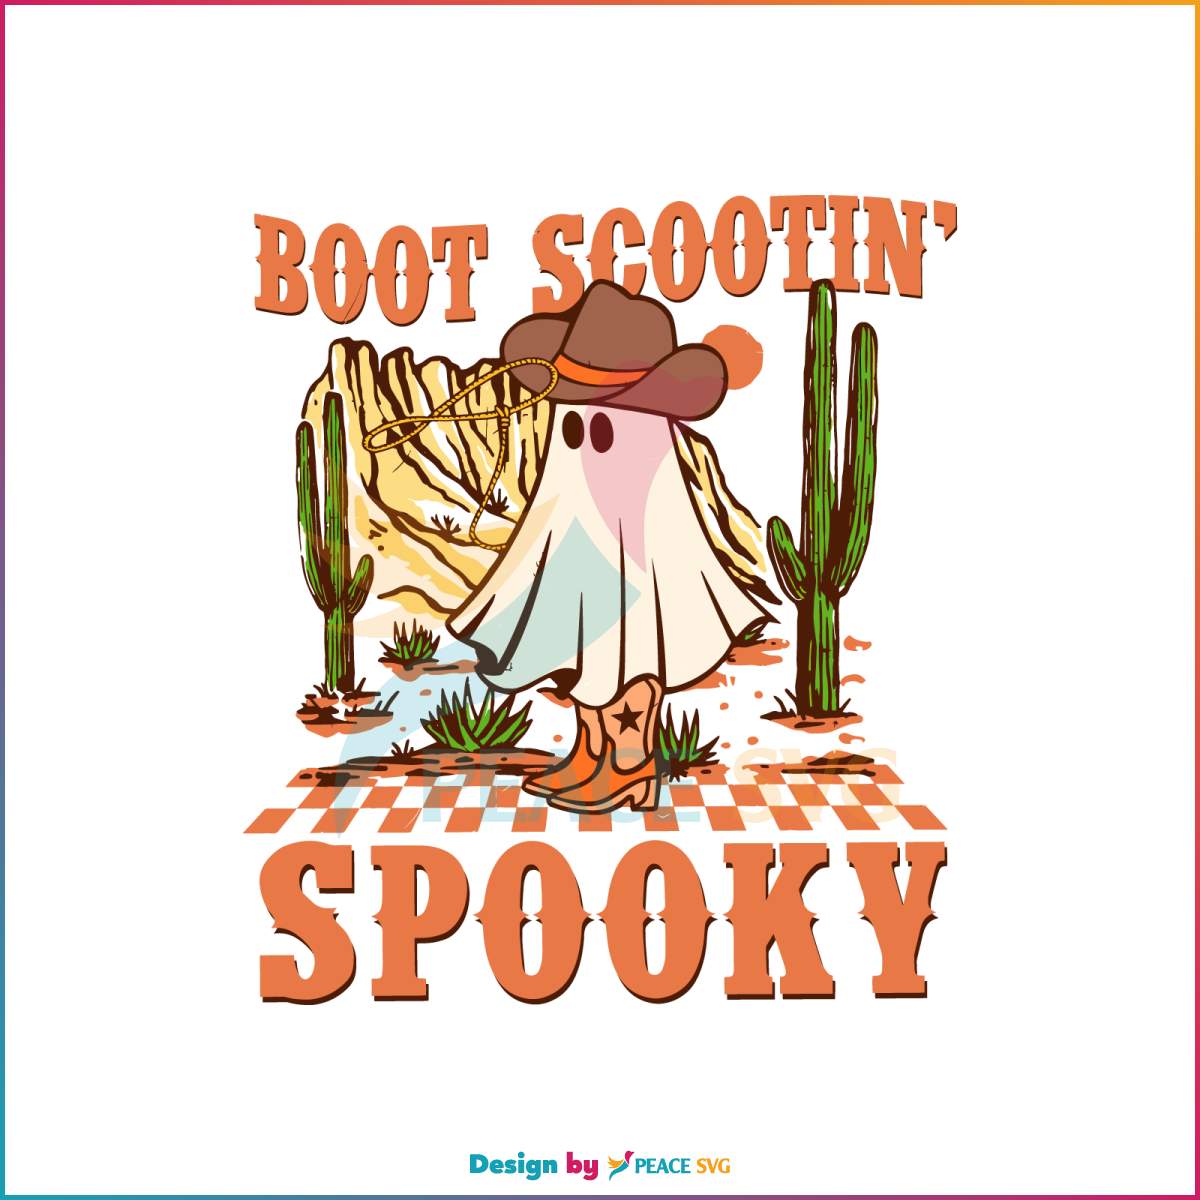 boot-scootin-spooky-cowboy-ghost-svg-graphic-design-file